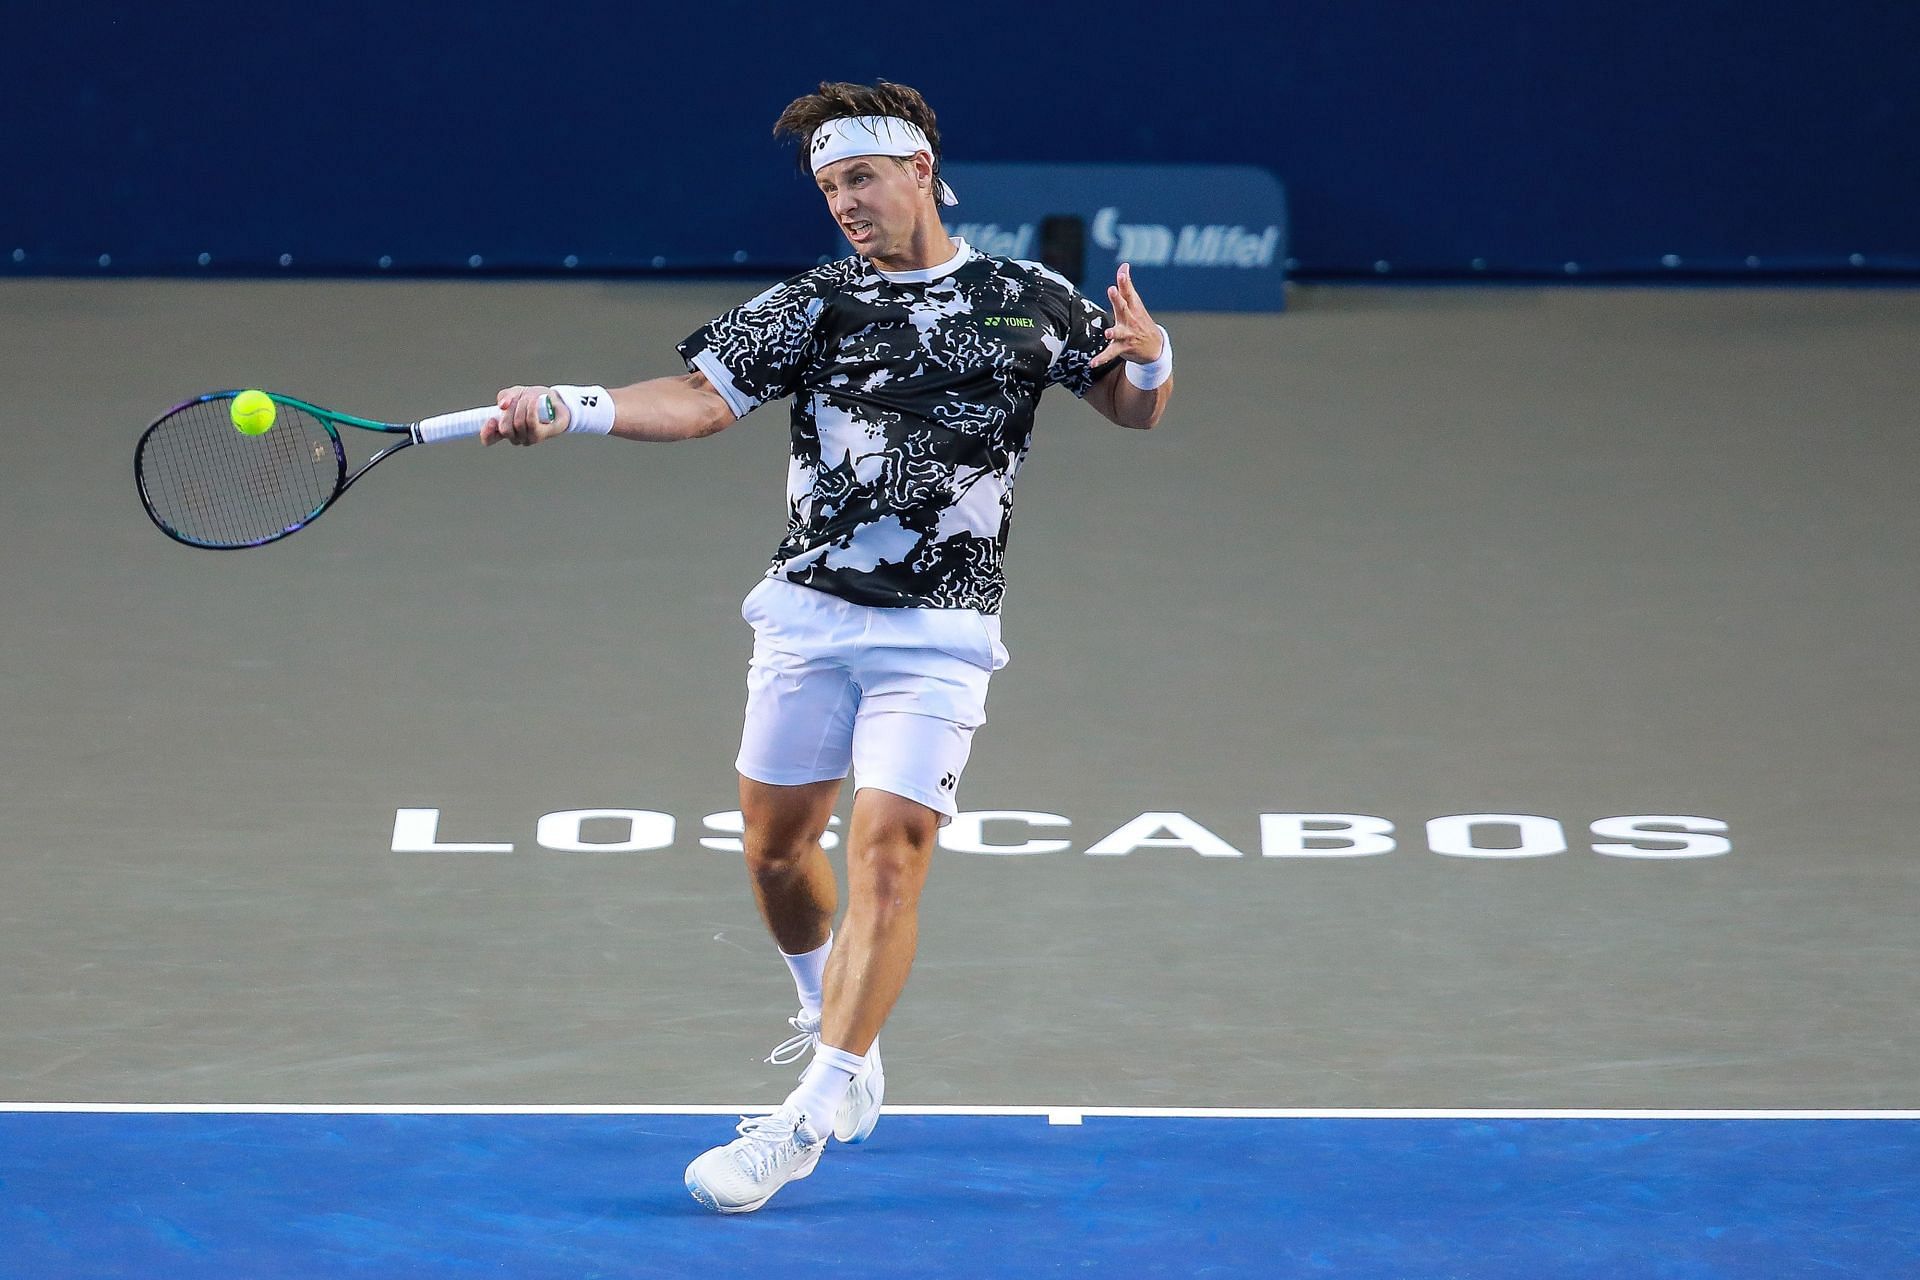 Berankis in action at the Mifel ATP Los Cabos Open 2022